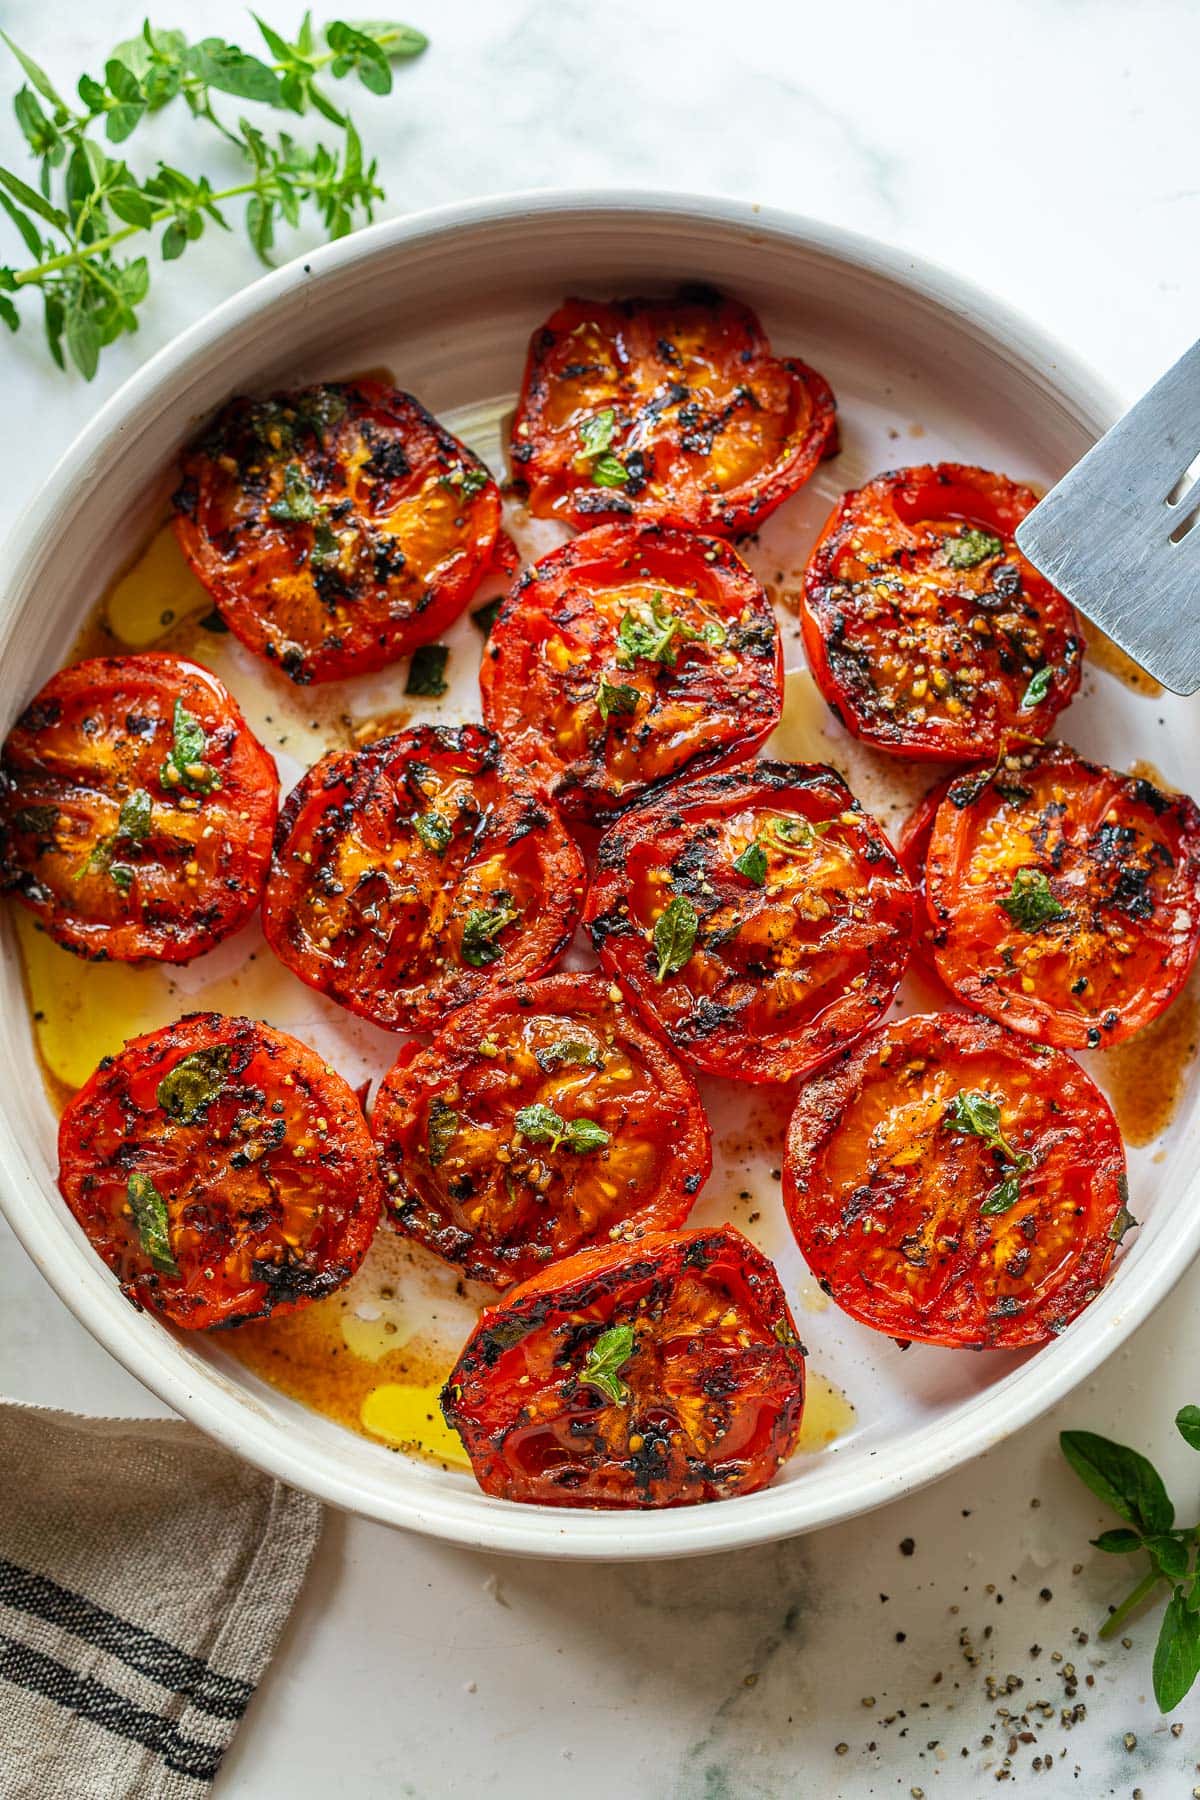 Savory grilled tomatoes with garlic and oregano, olive oil and balsamic vinegar. A delicious, healthy, summery side dish in 20 minutes! Vegan